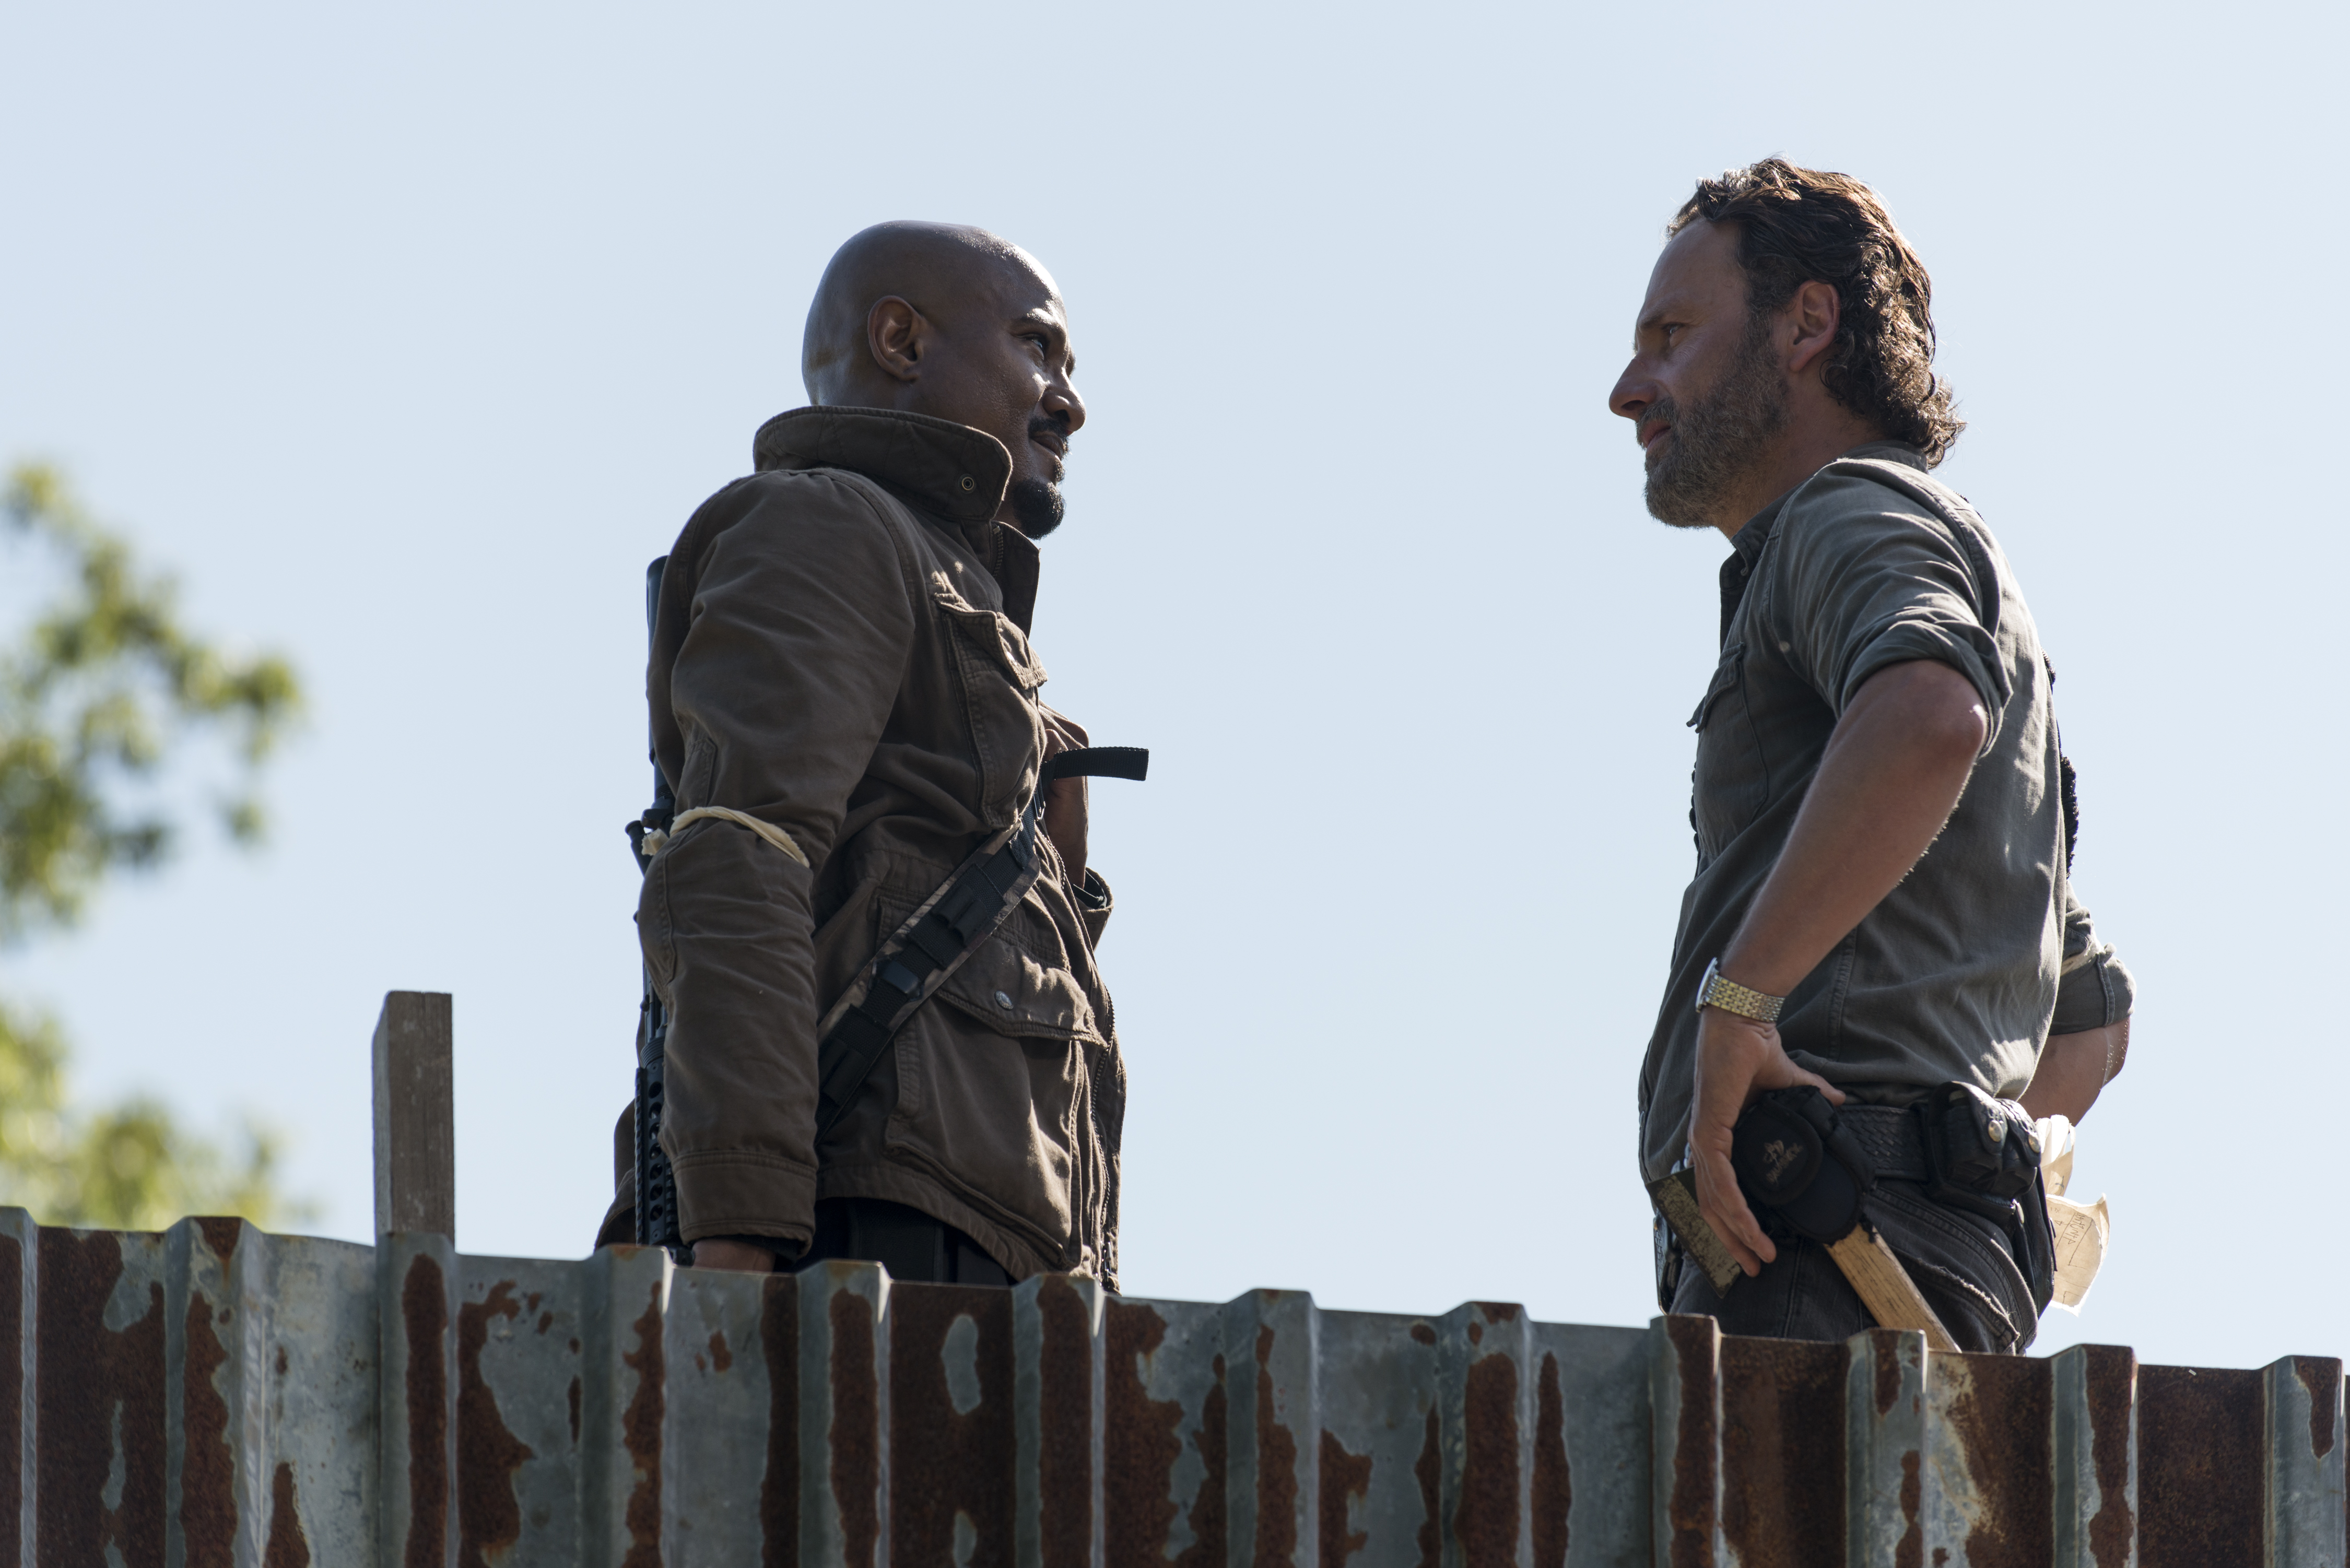 Andrew Lincoln as Rick Grimes, Seth Gilliam as Father Gabriel Stokes - The Walking Dead _ Season 8, Episode 1 - Photo Credit: Gene Page/AMC